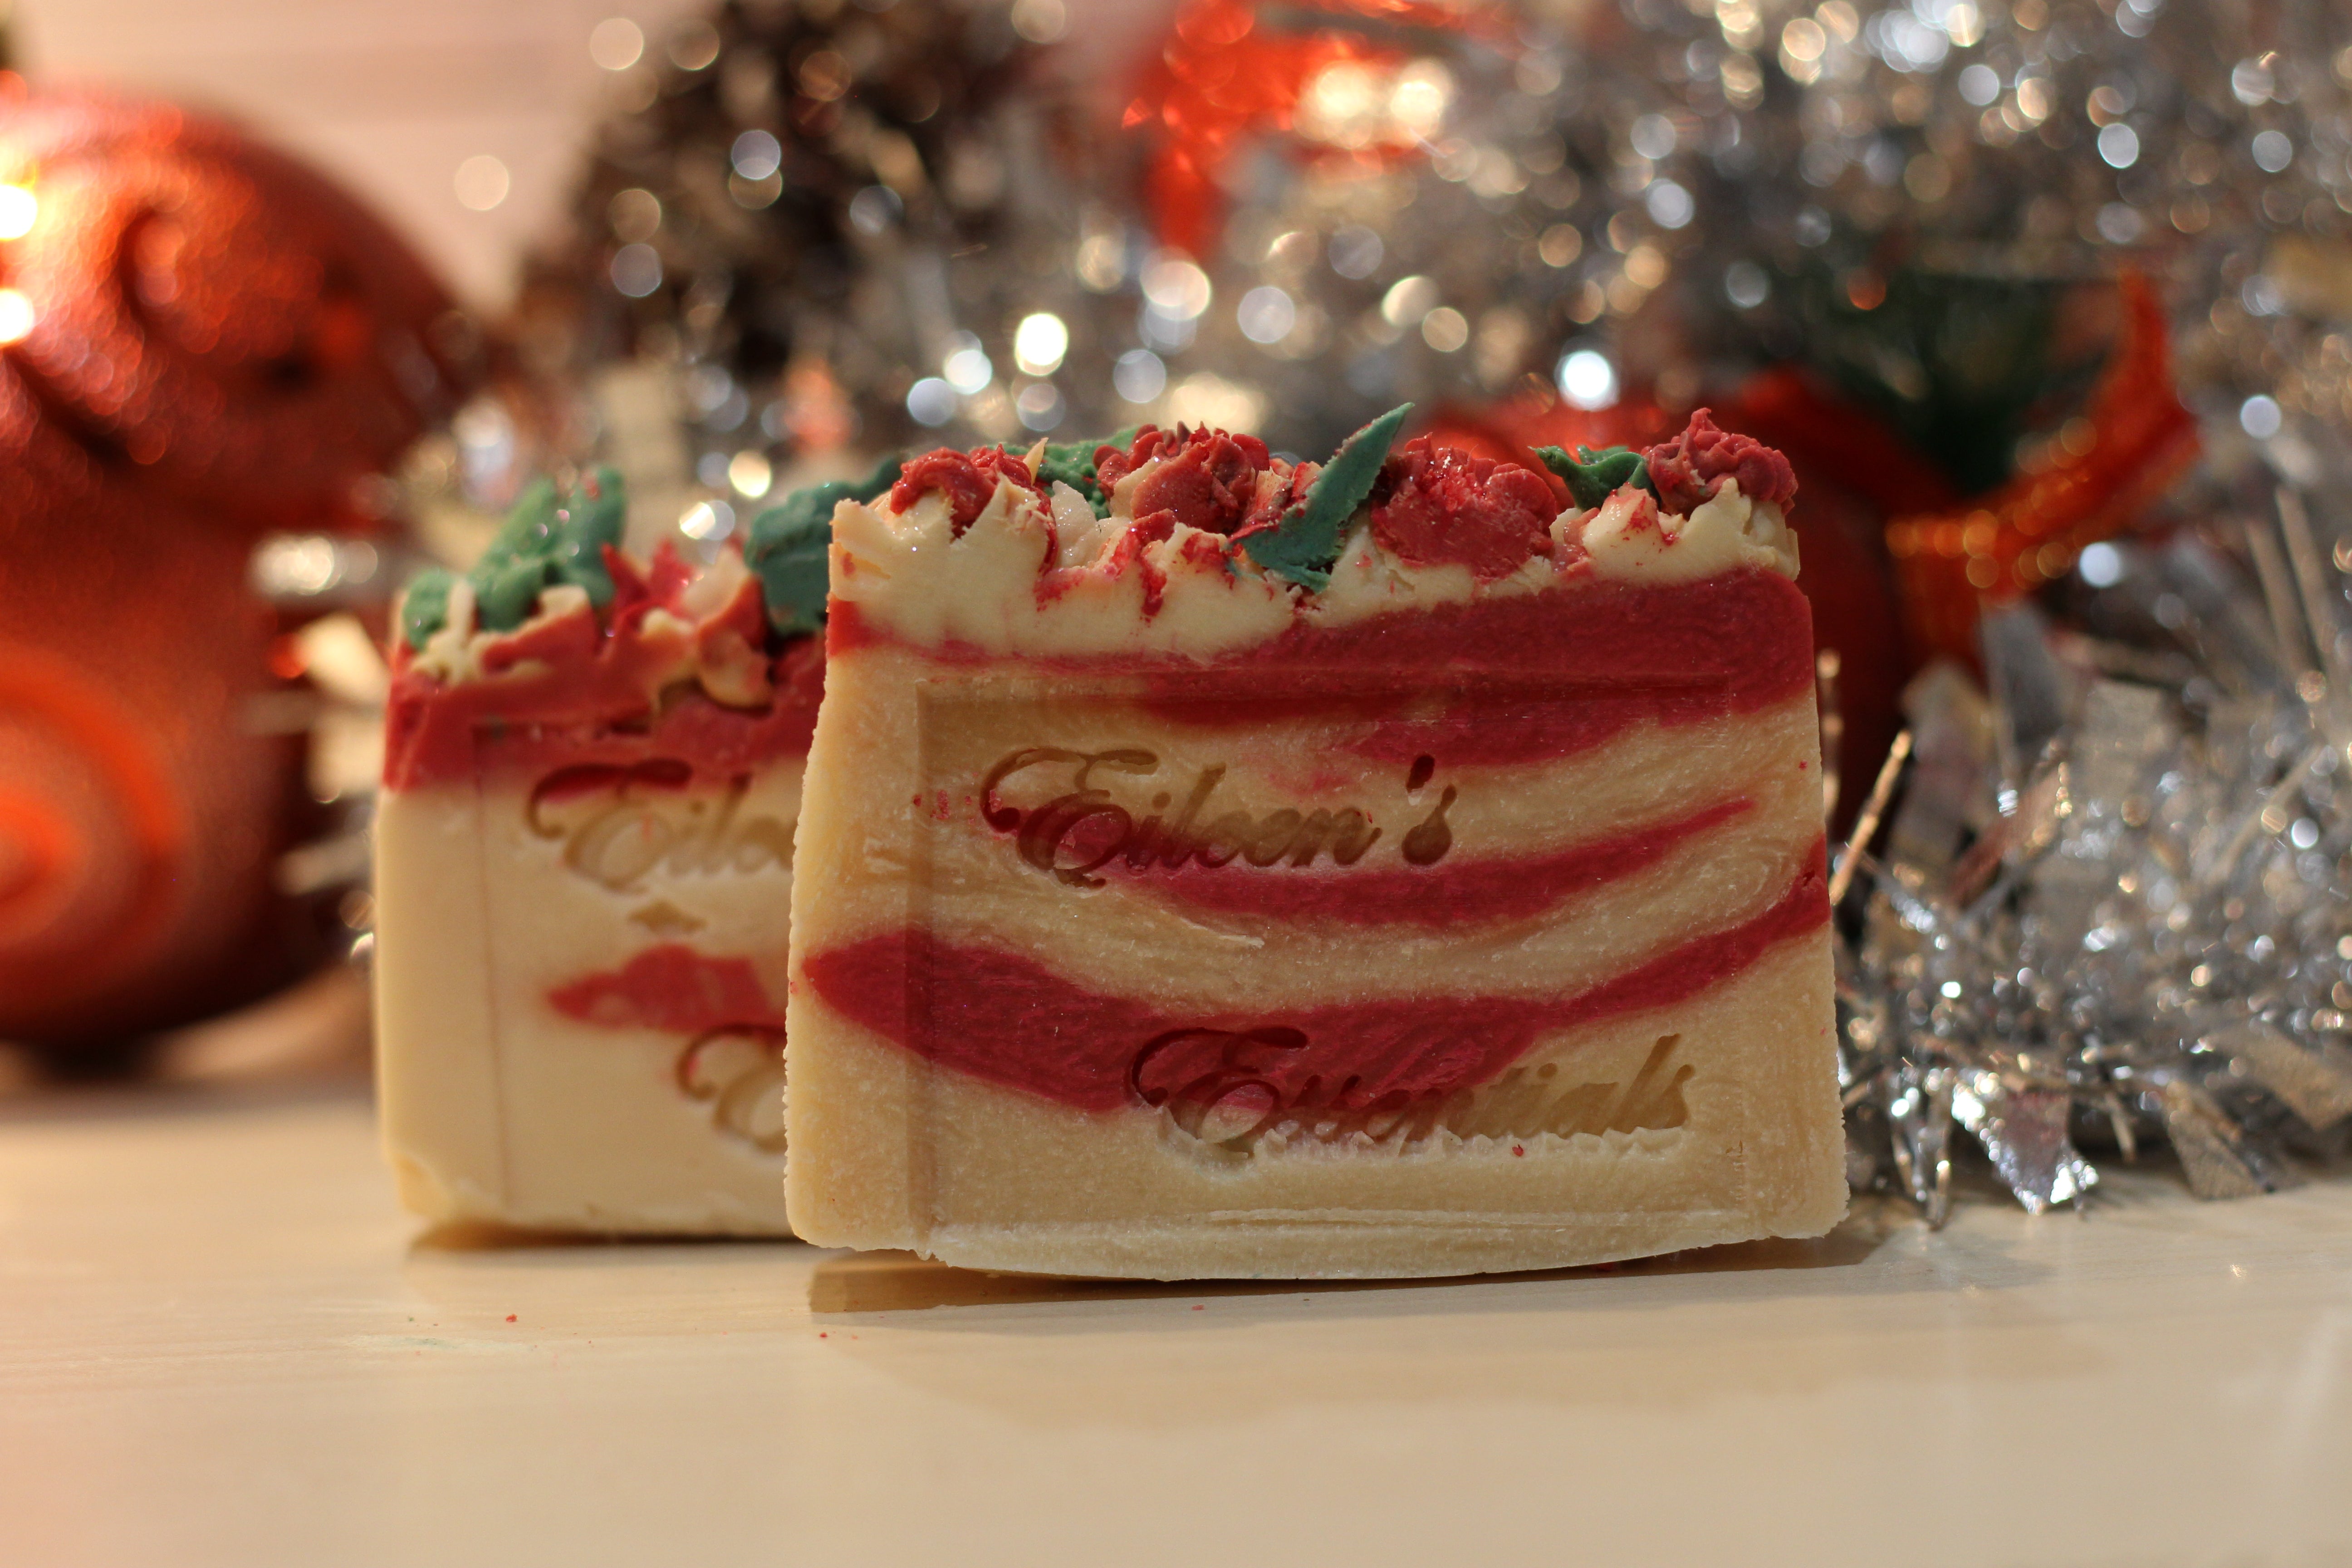 Handcrafted Artisan Holiday Soap; PURELY PEPPERMINT